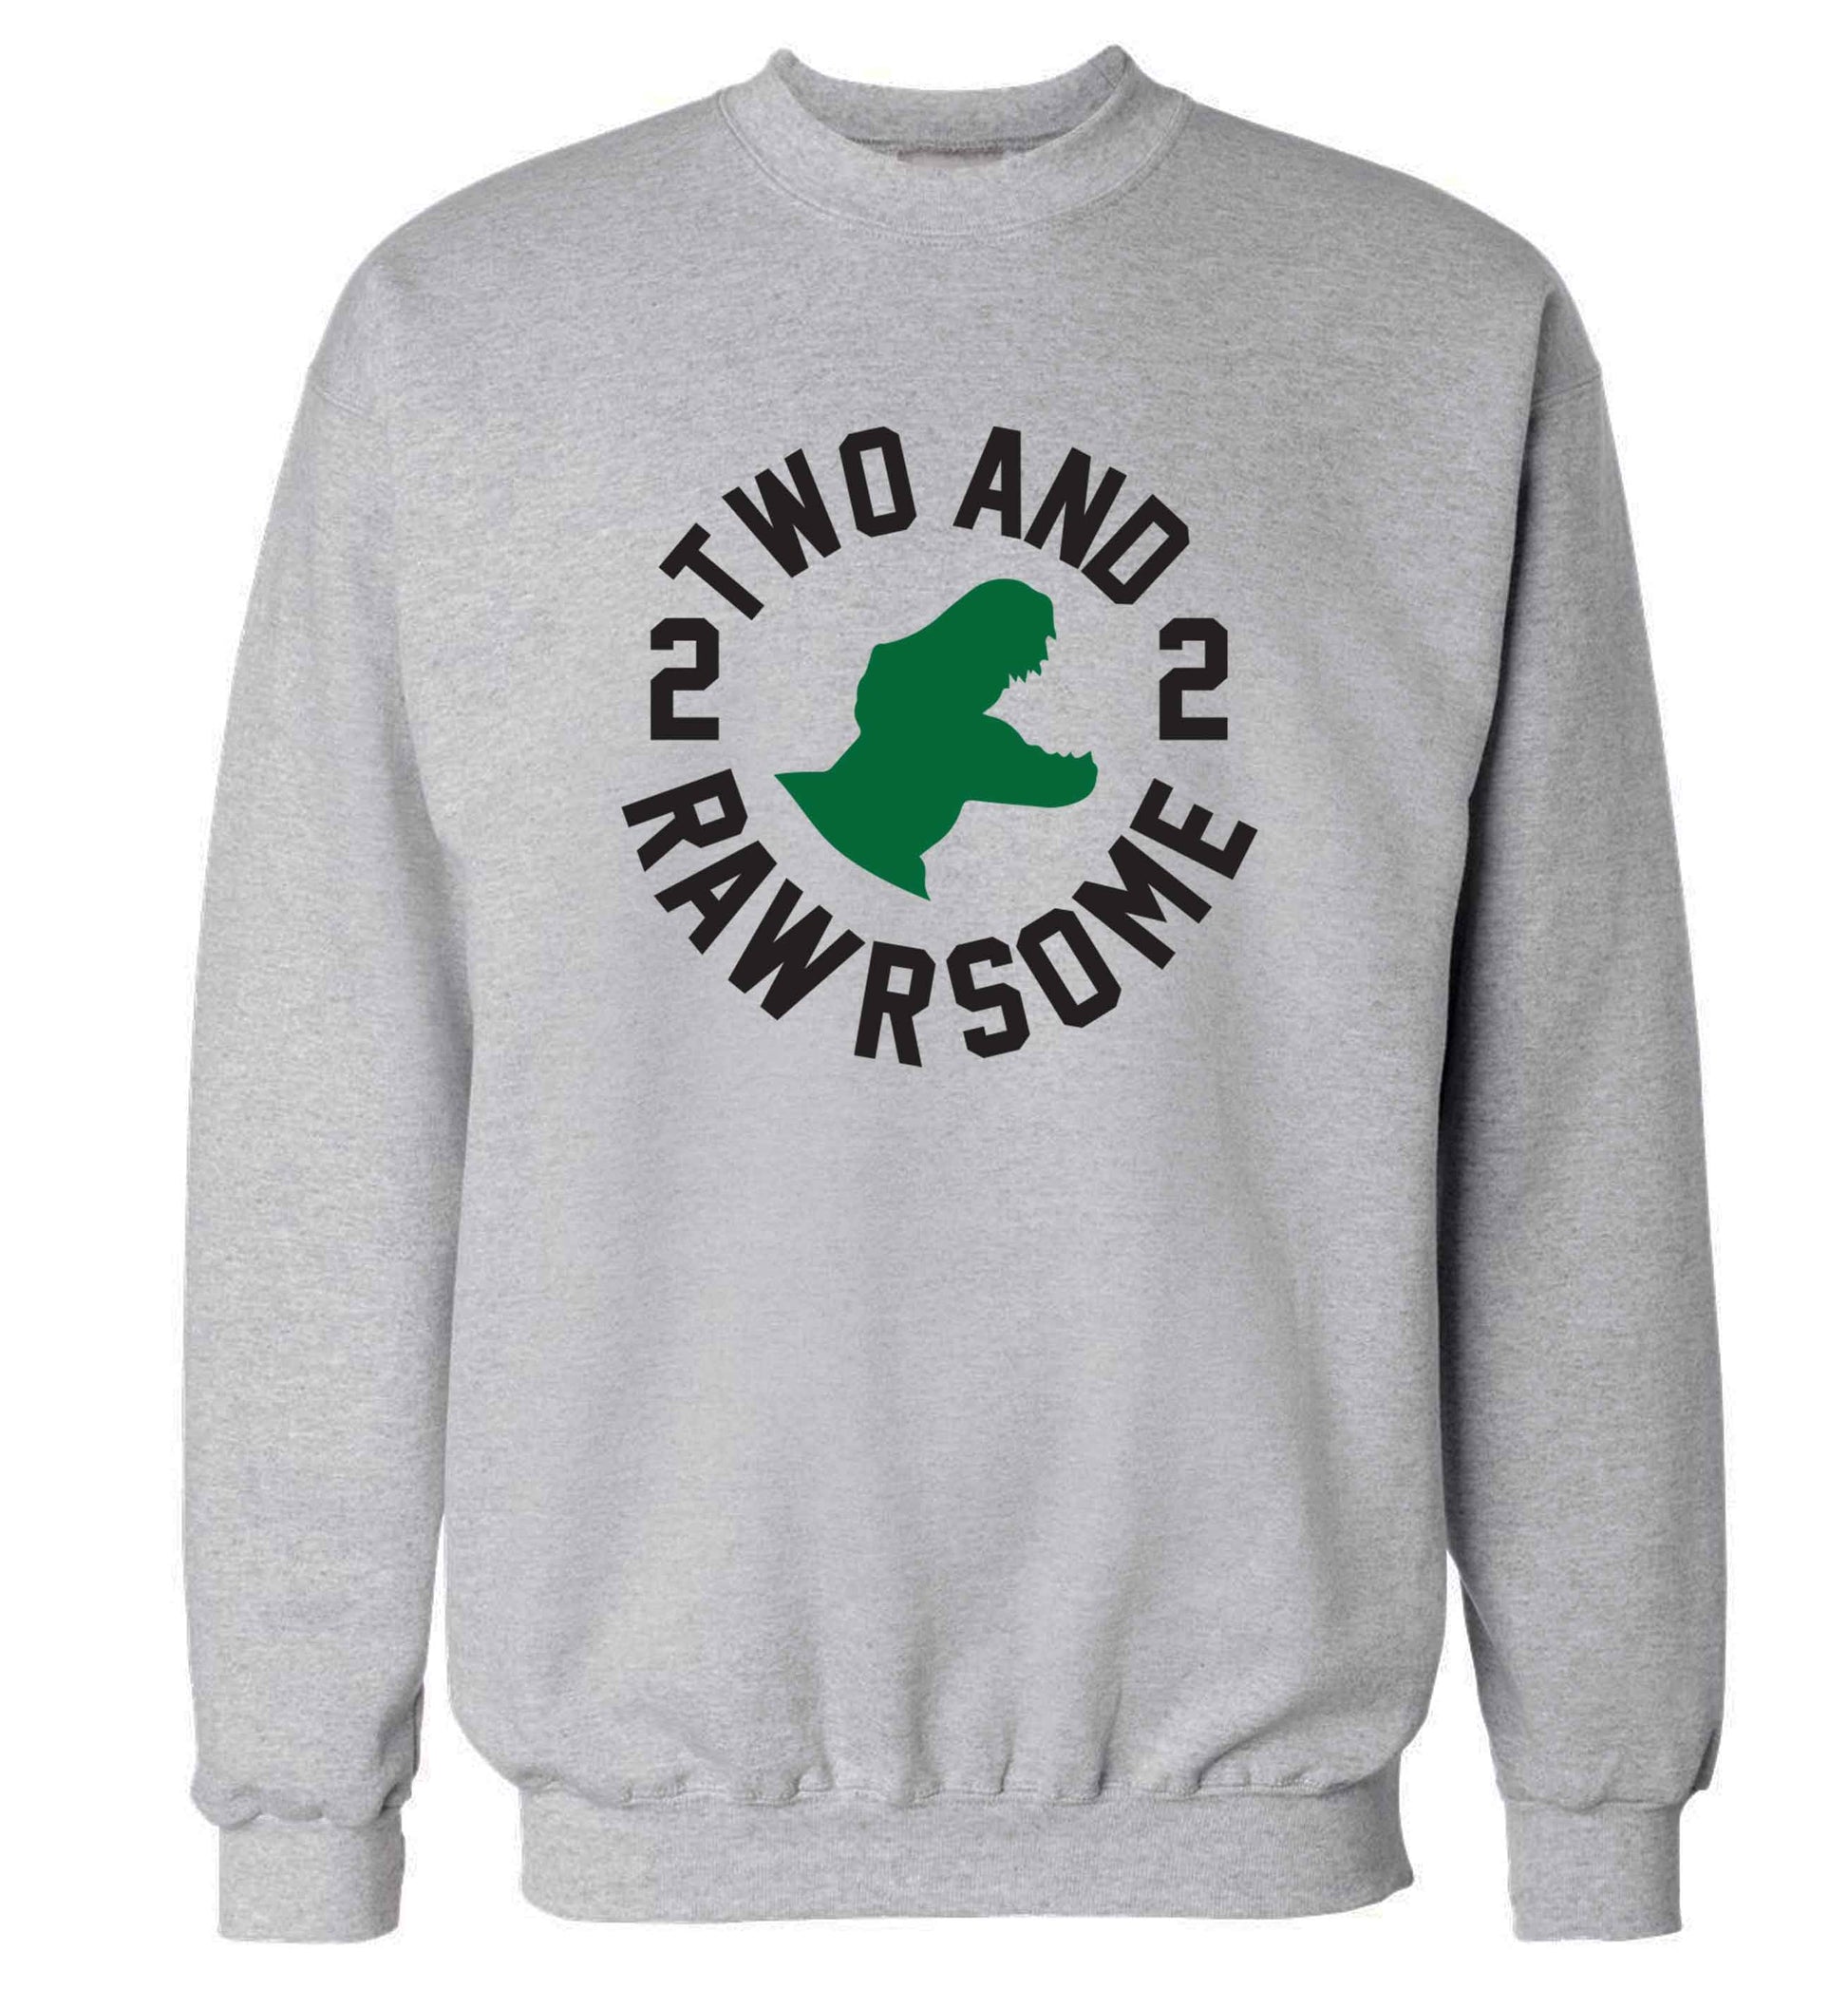 Two and rawrsome adult's unisex grey sweater 2XL